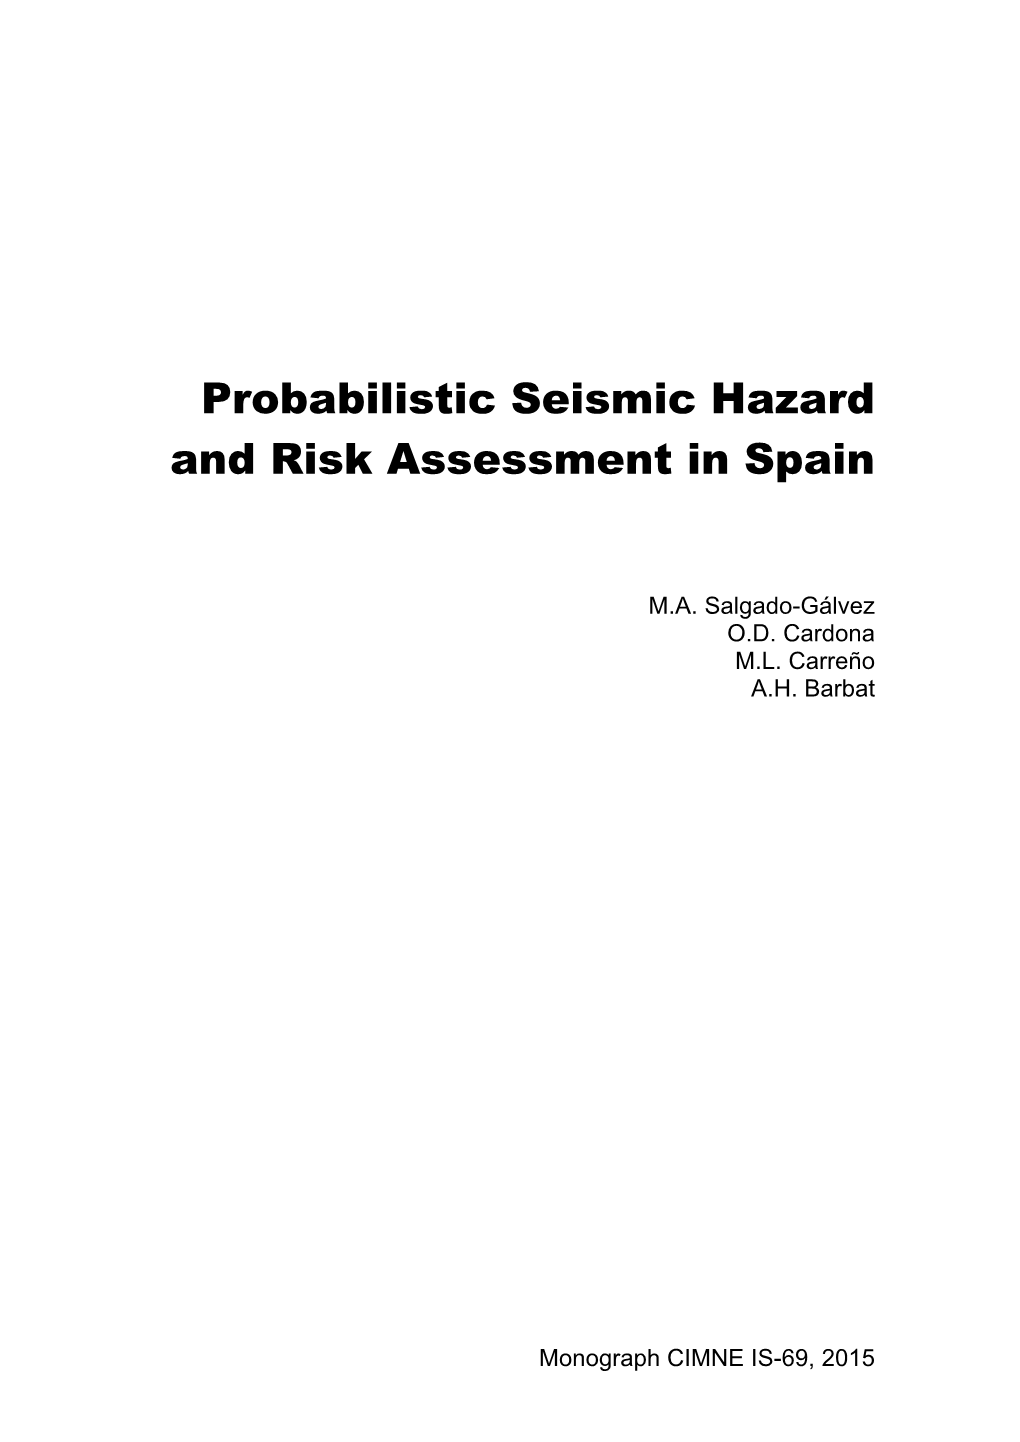 Probabilistic Seismic Hazard and Risk Assessment in Spain